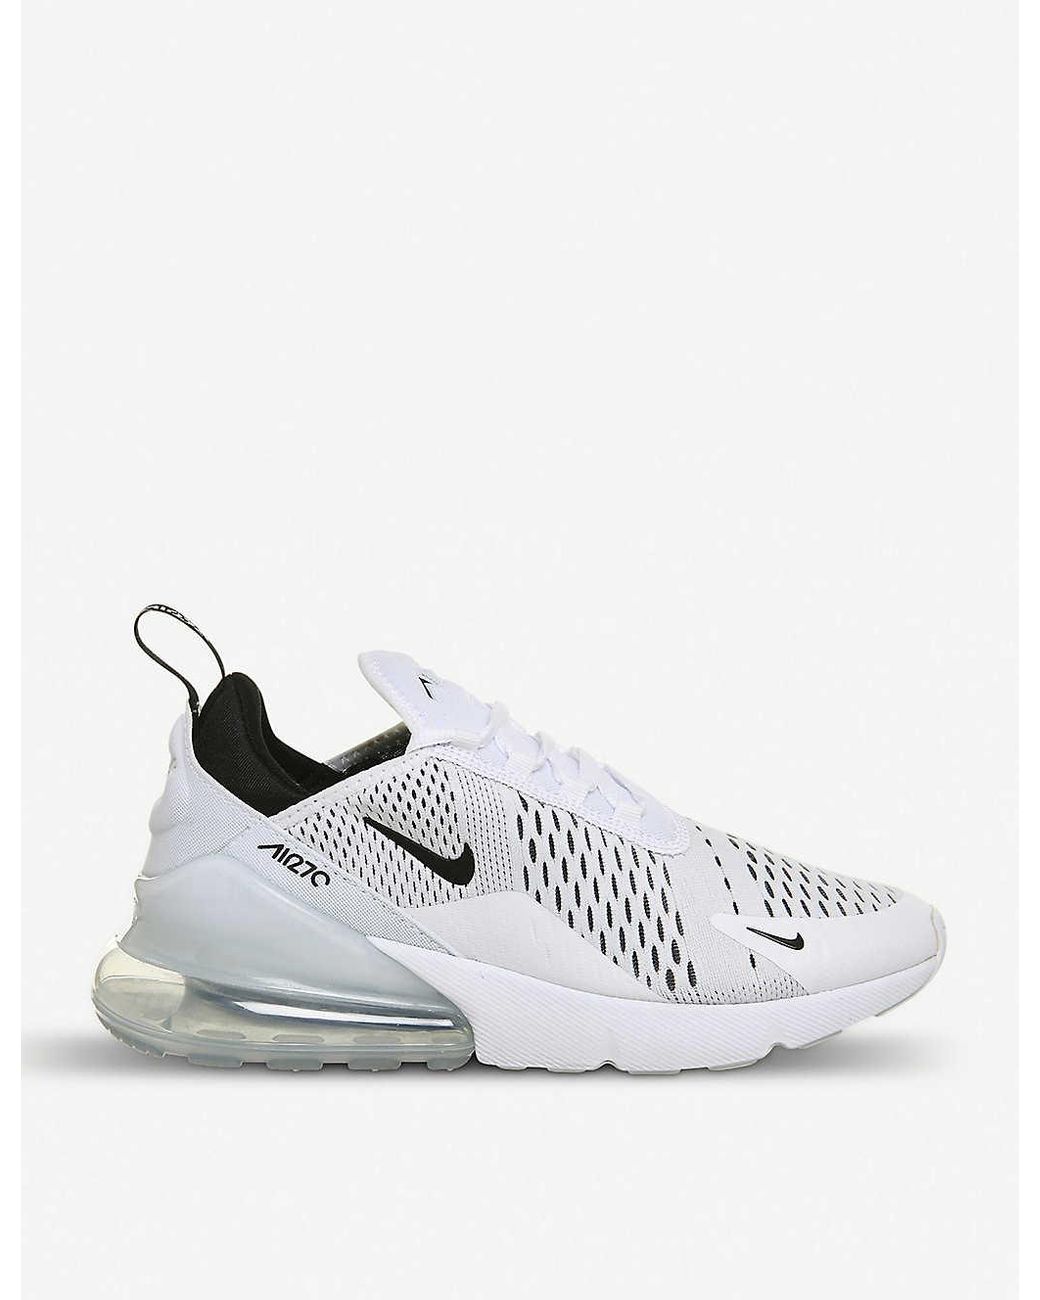 Nike Air Max 270 Low-top Mesh Trainers in White | Lyst UK